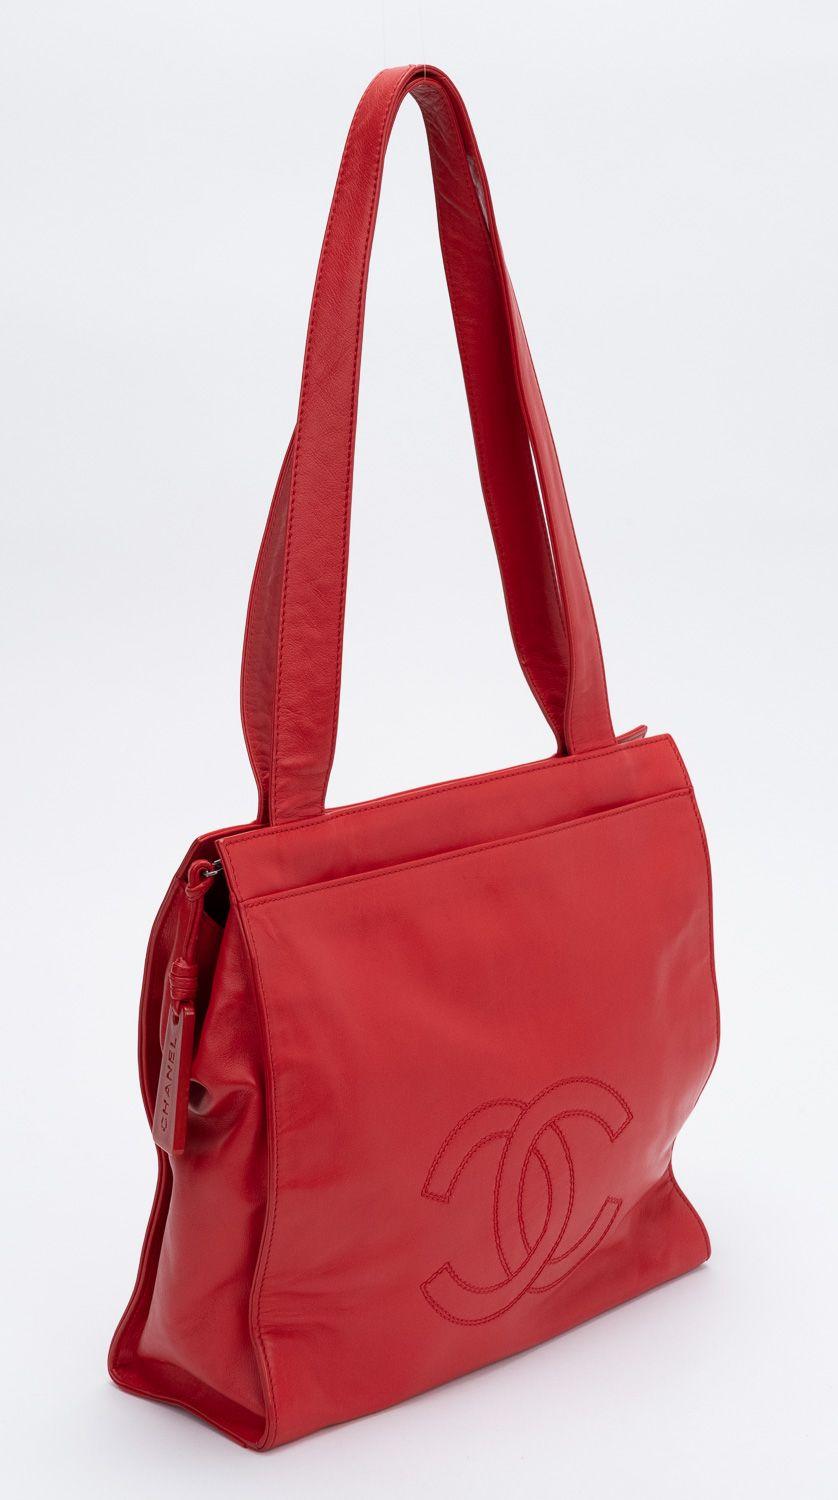 Vintage Chanel tote bag from the 90s in red. The bag shows a big CC hedged logo on front of it. The shoulder drop is 11.5